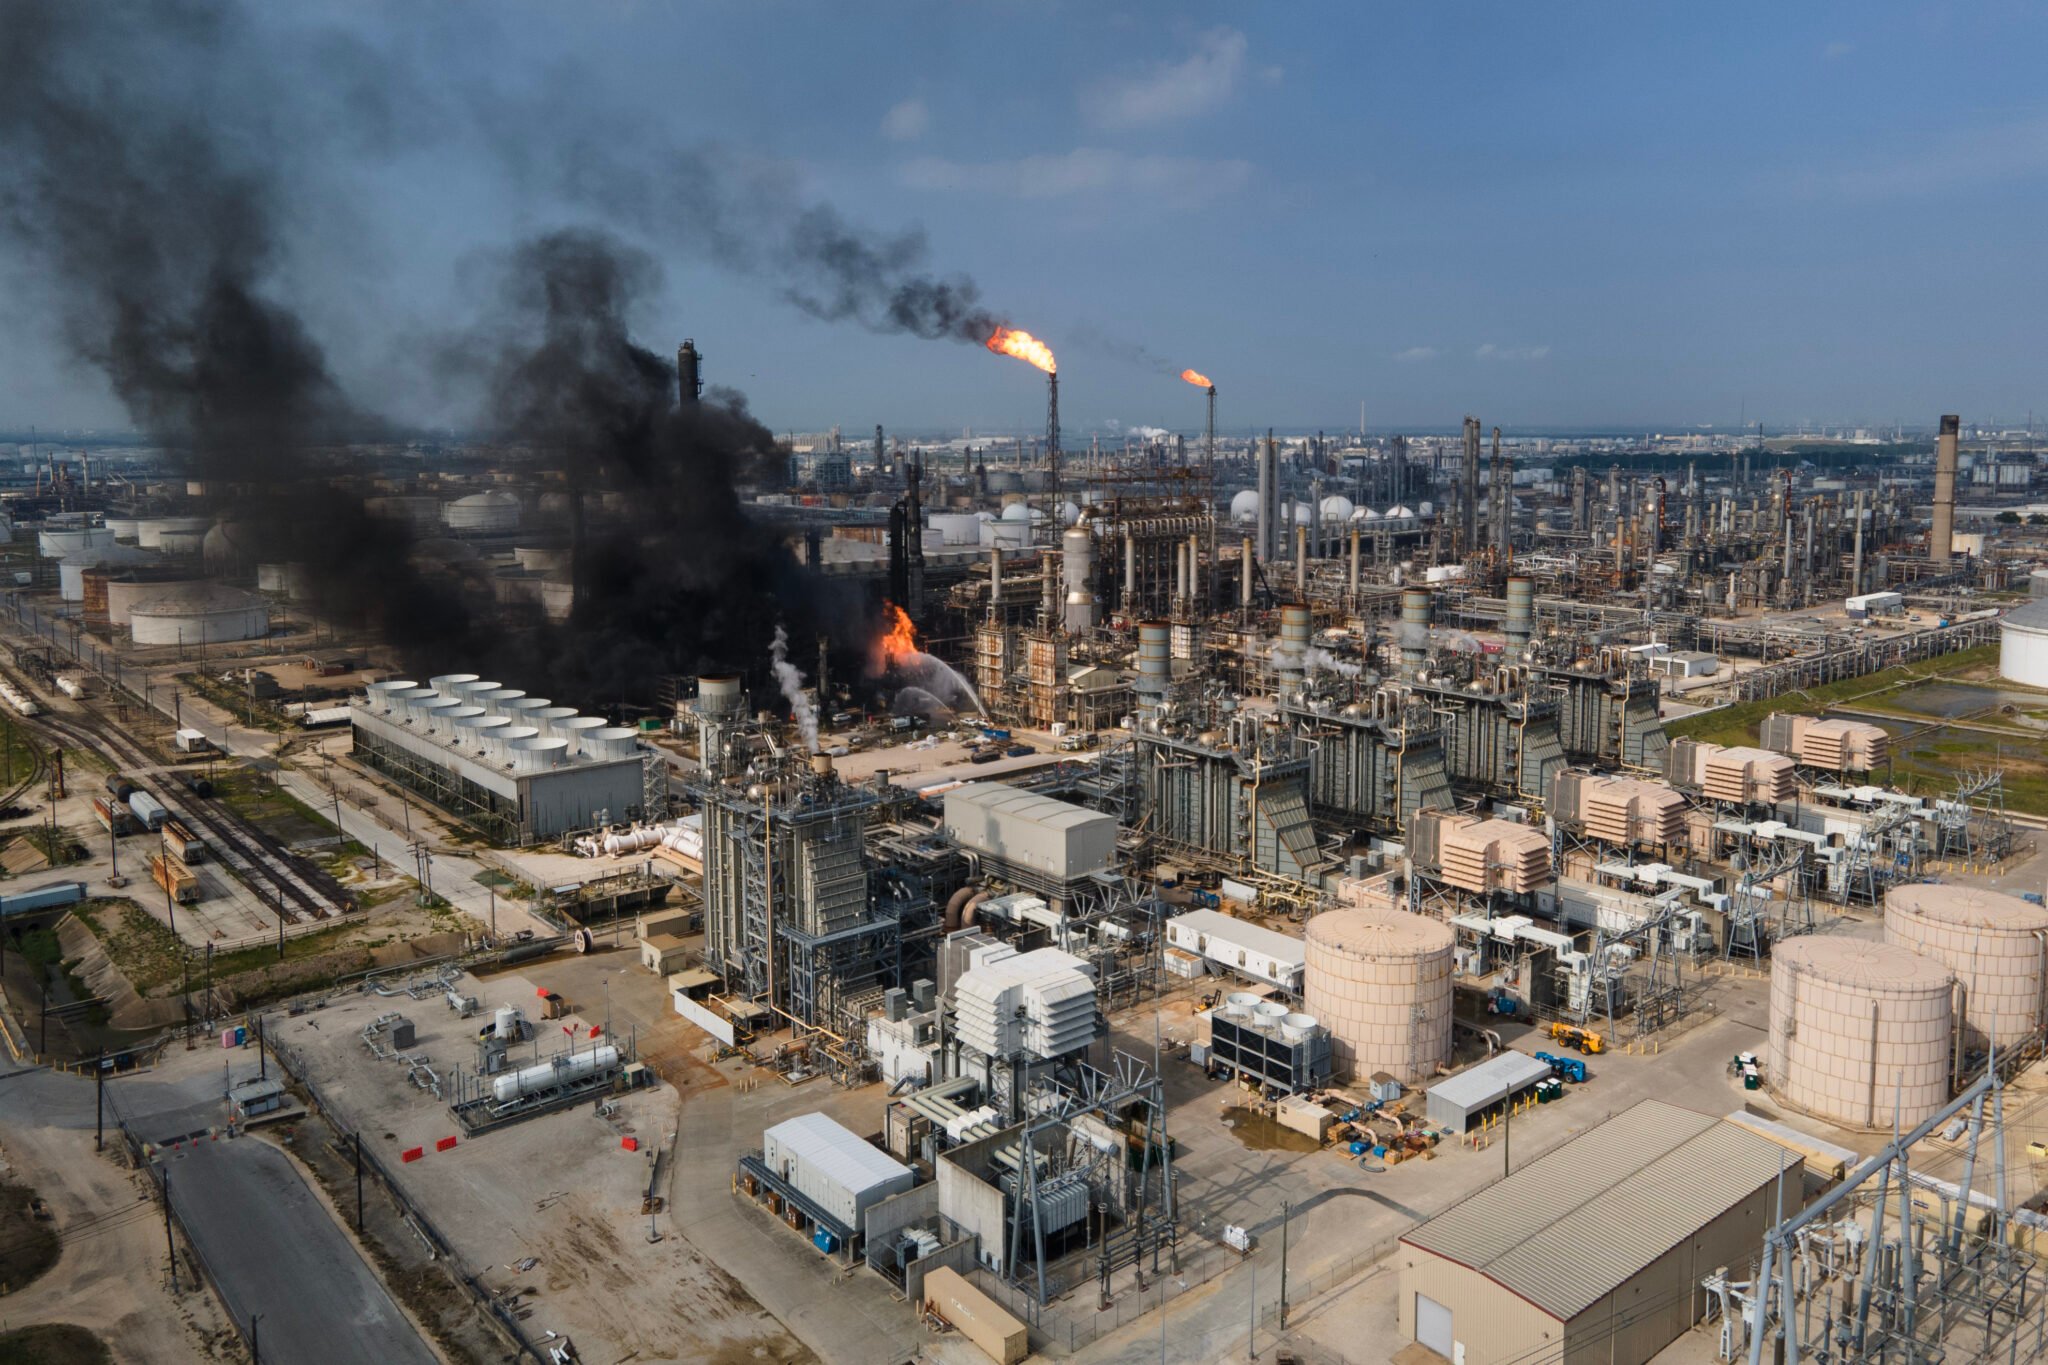 Plumes of black smoke rise into the sky from a massive fire at a Houston-area Shell refinery. Streams of water from firefighters are also visible while smokestacks burn off other chemicals.